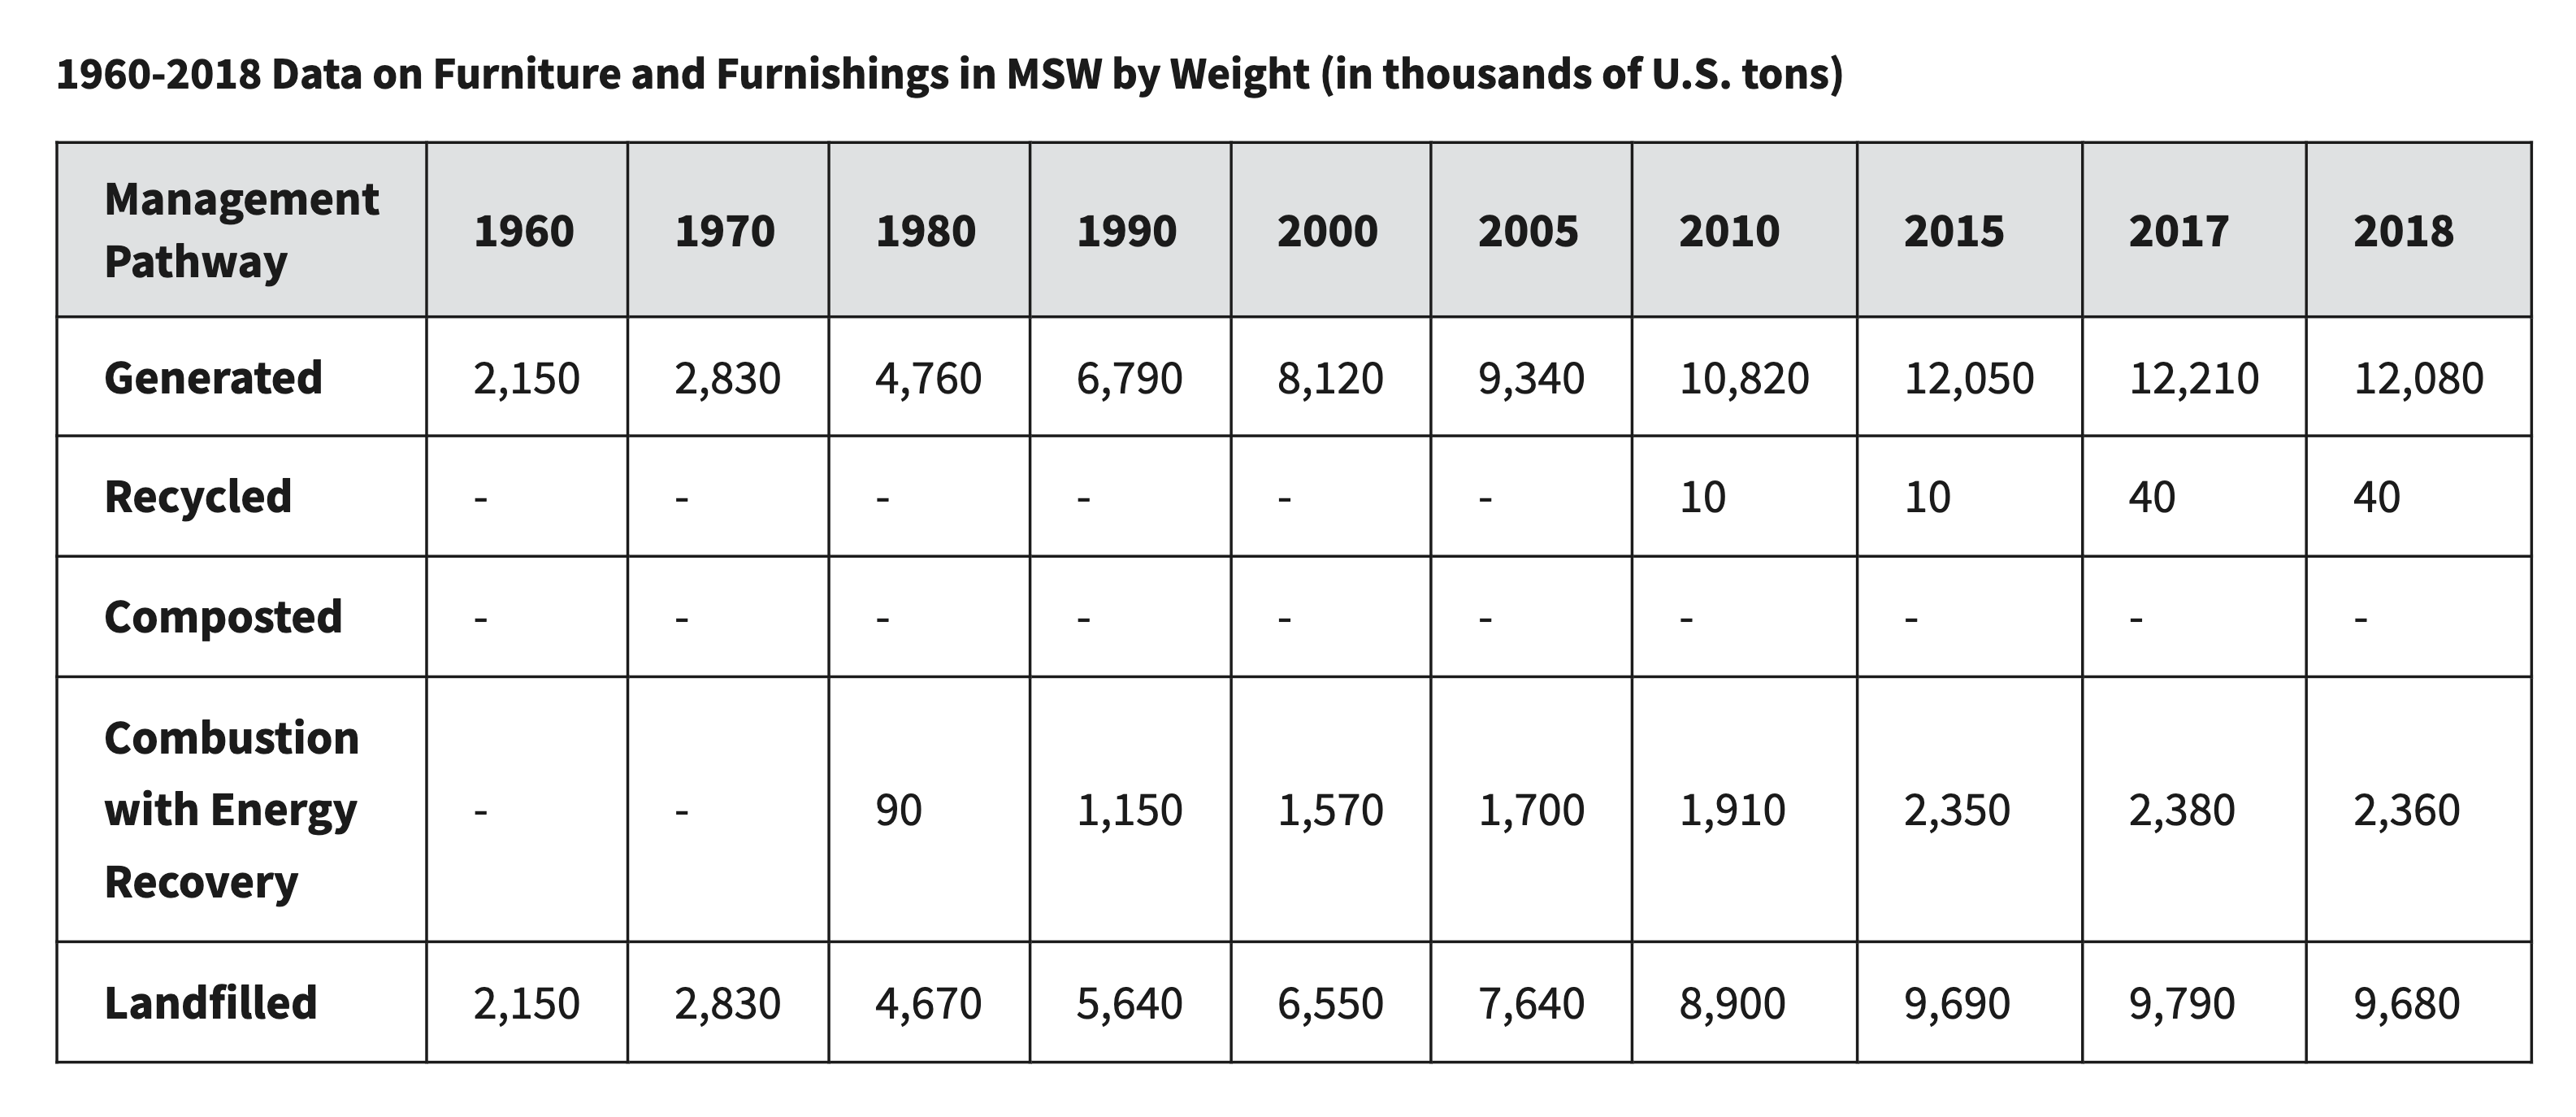 1960-2018 Data on Furniture and Furnishings in MSW